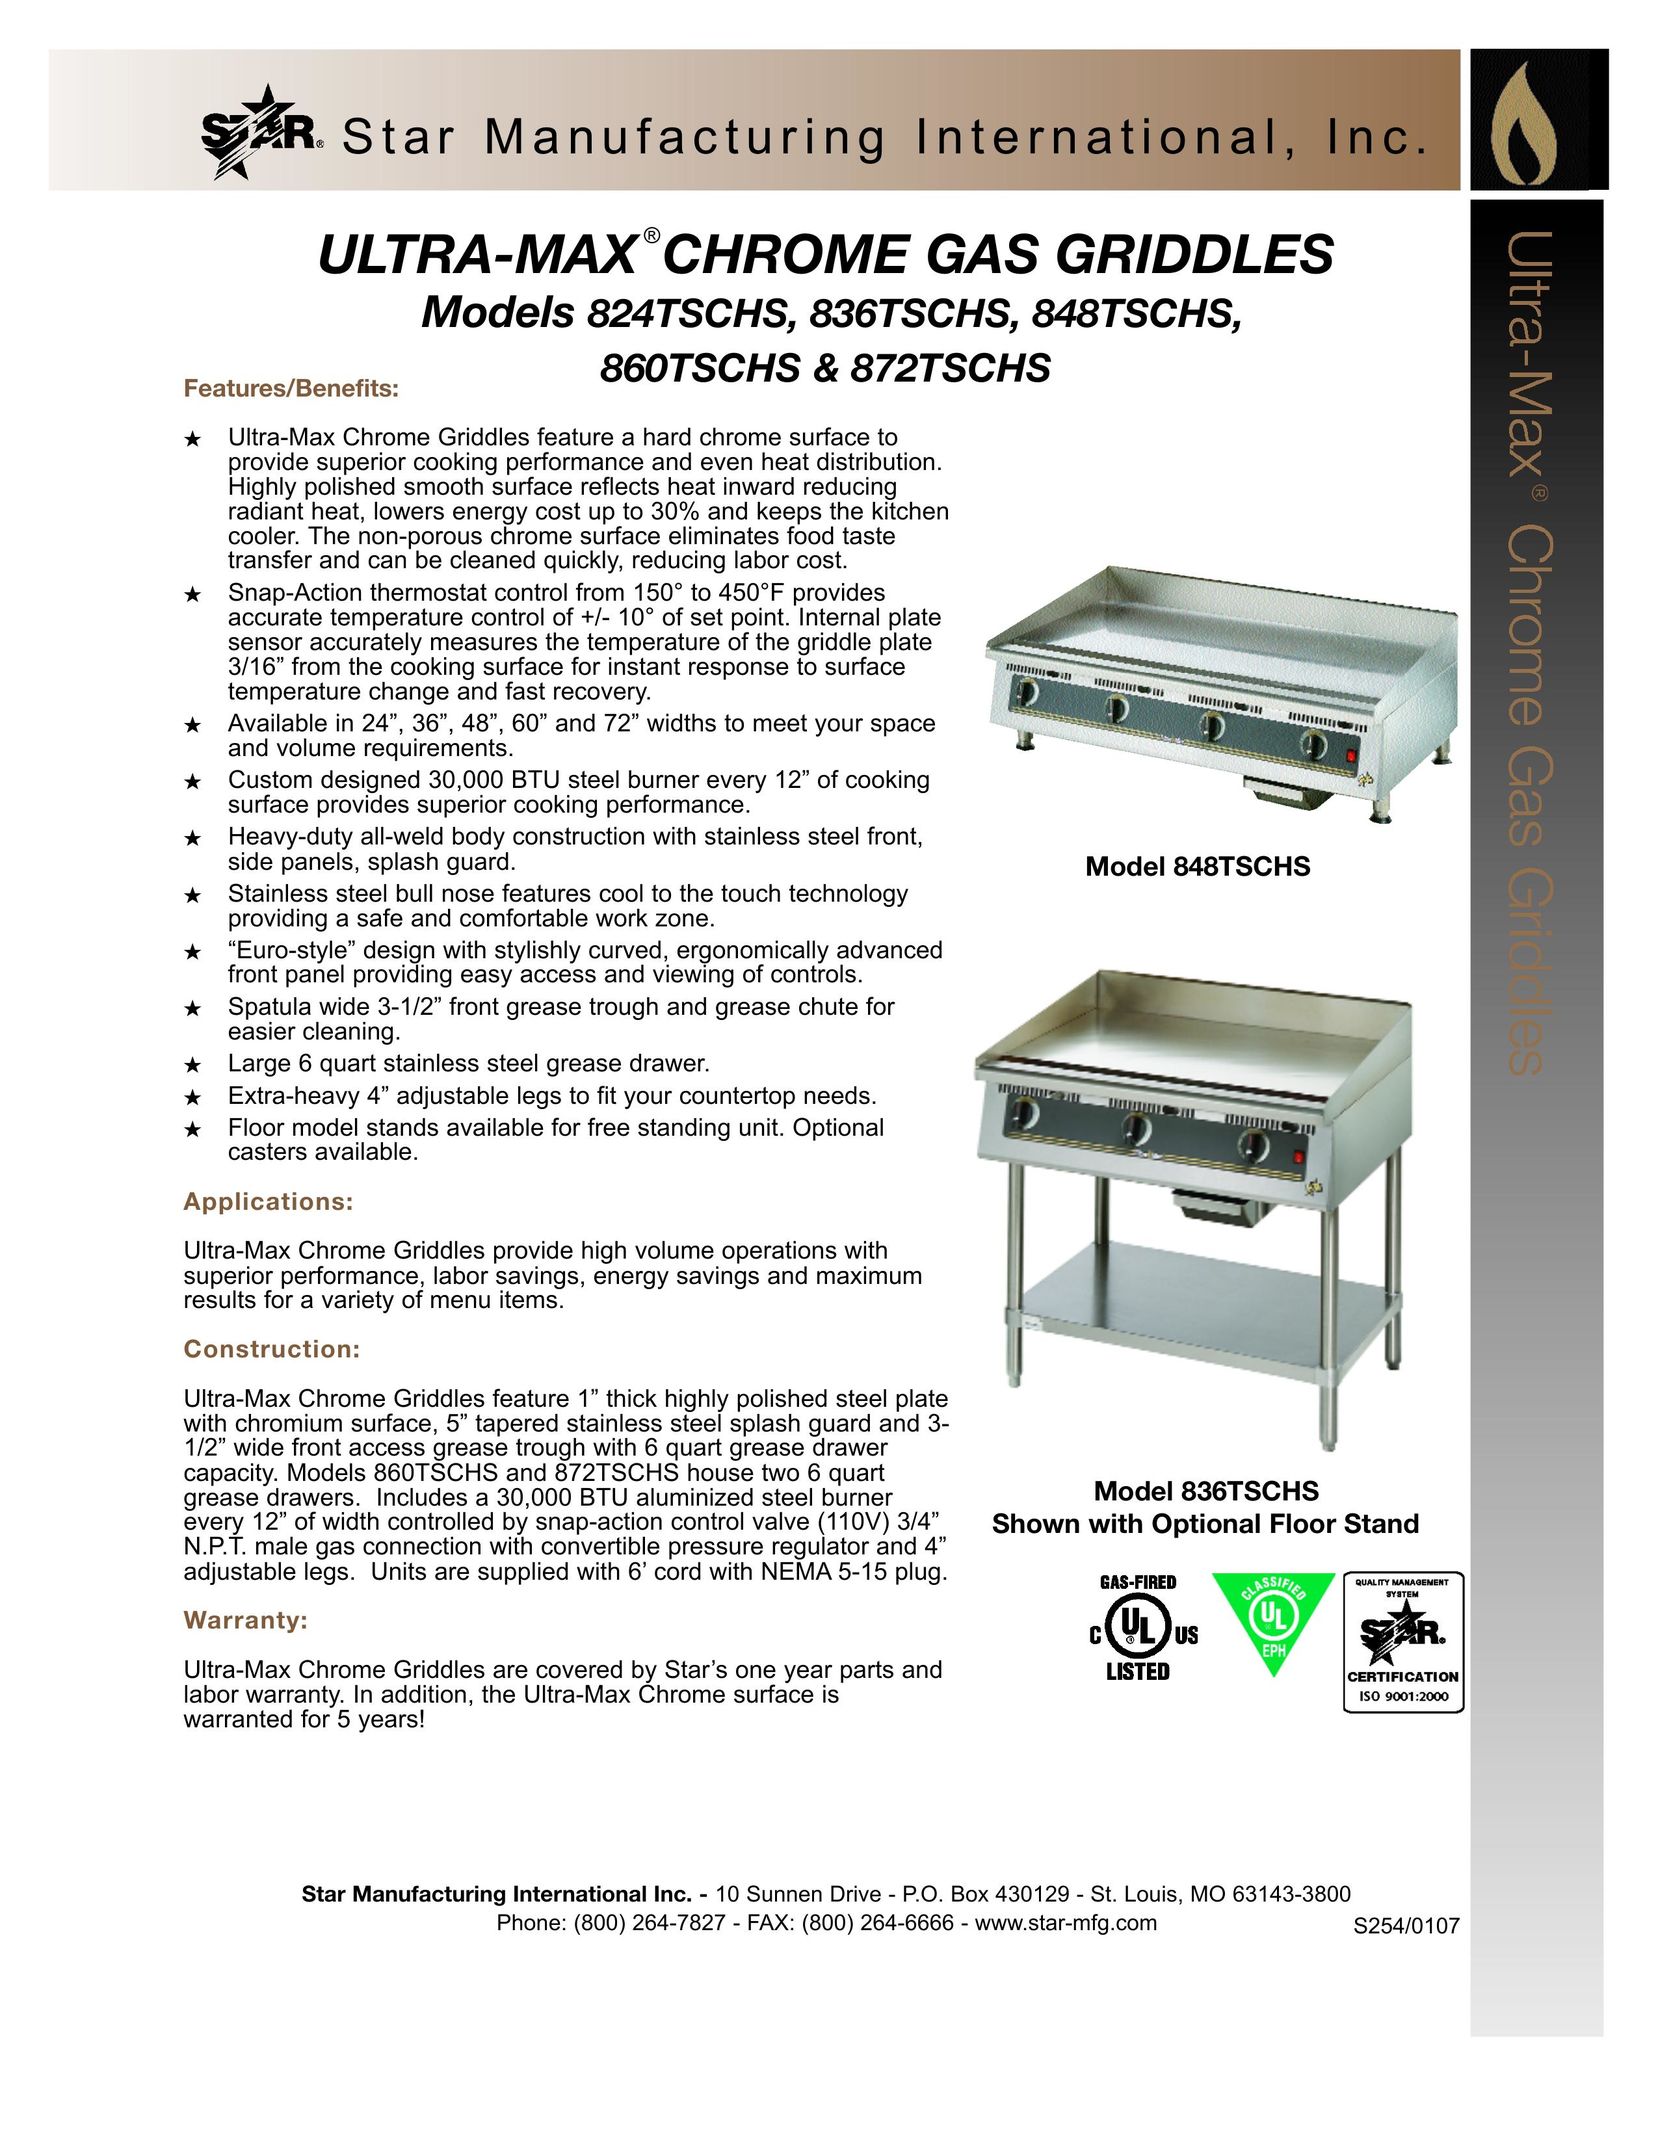 Star Manufacturing 824TSCHS Griddle User Manual